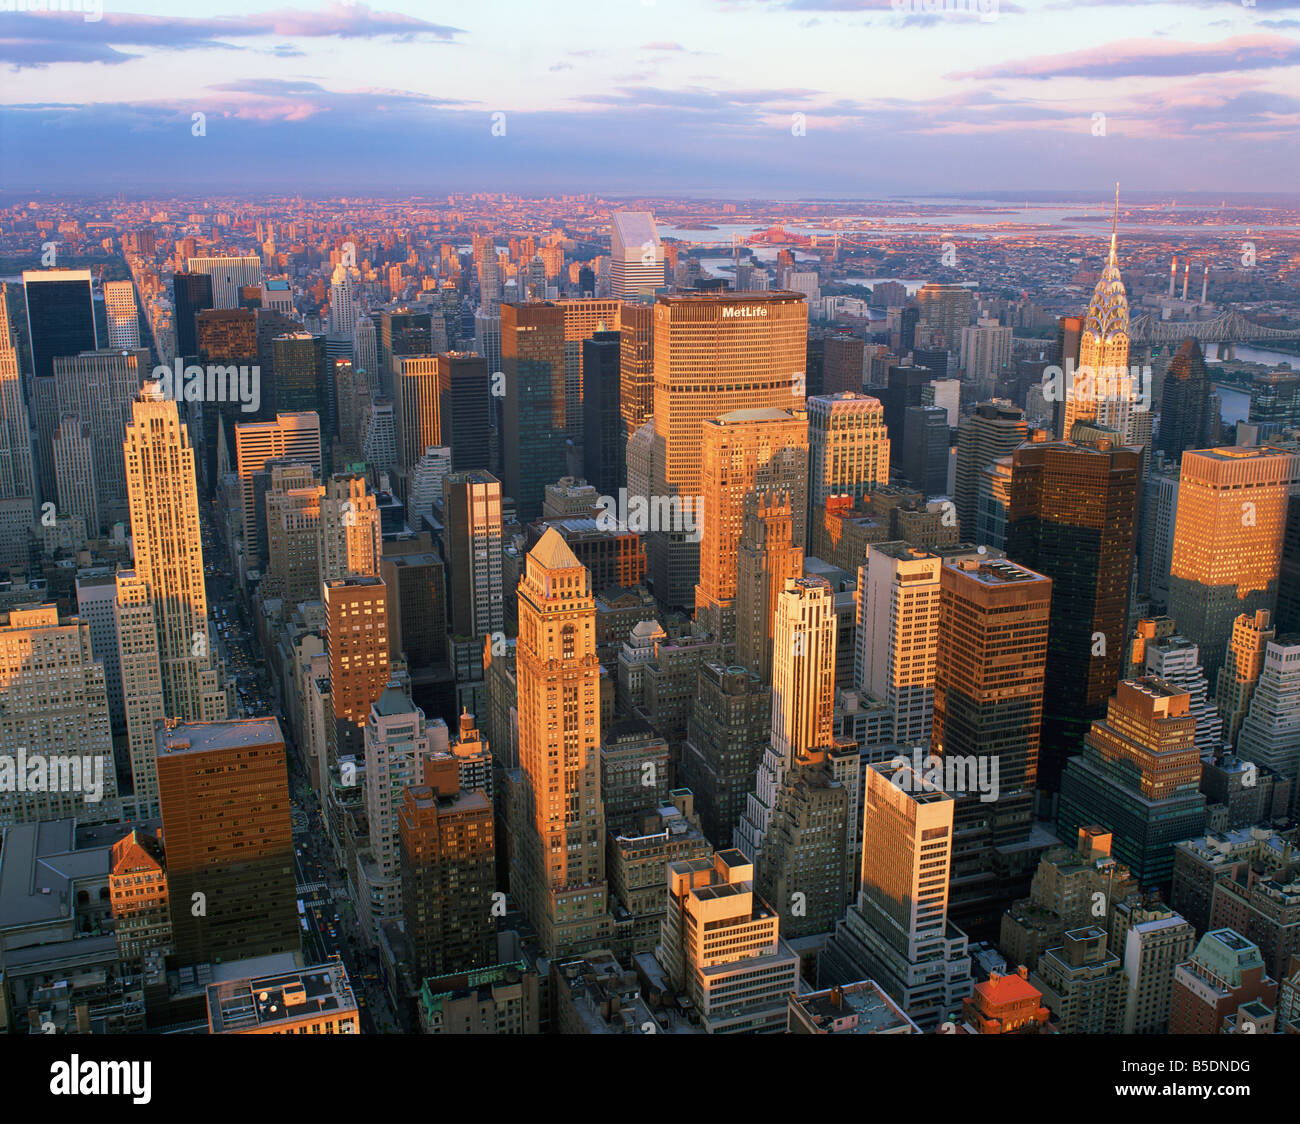 Low level aerial view of Uptown skyline taken from the Empire State Building in New York, USA Stock Photo